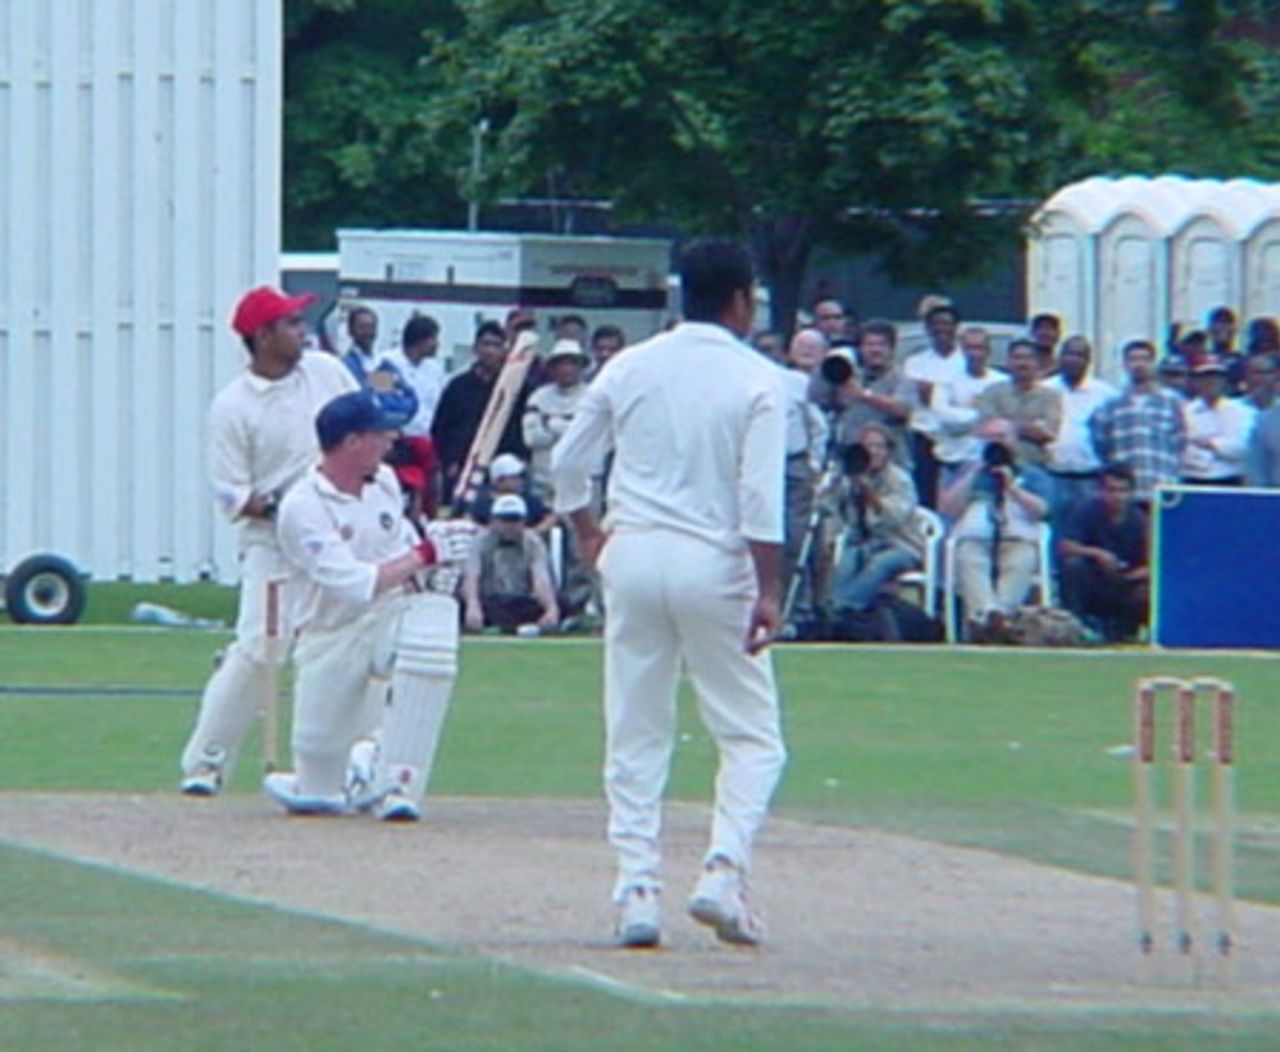 Scottish batsman Craig Wright sweeps a delivery from Canadian off spinner Joe Harris during his innings of 25. Wicket-keeper Ashish Bagai follows the path of the ball. ICC Trophy 2001: Canada v Scotland, Toronto Cricket, Skating and Curling Club, 17 July 2001.